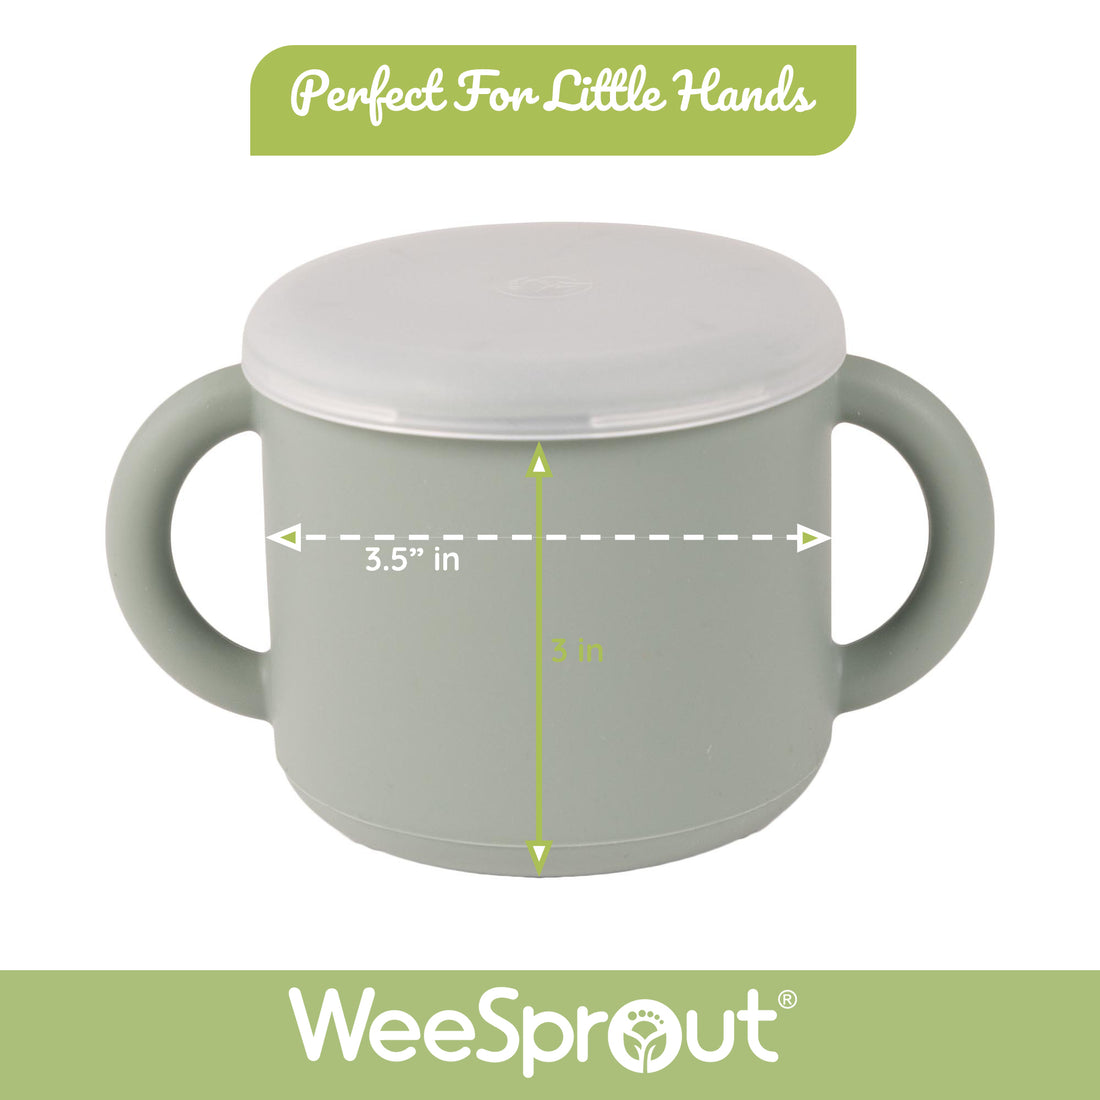 WeeSprout Glass Cups With Lids & Straws, Spill-resistant Cups for